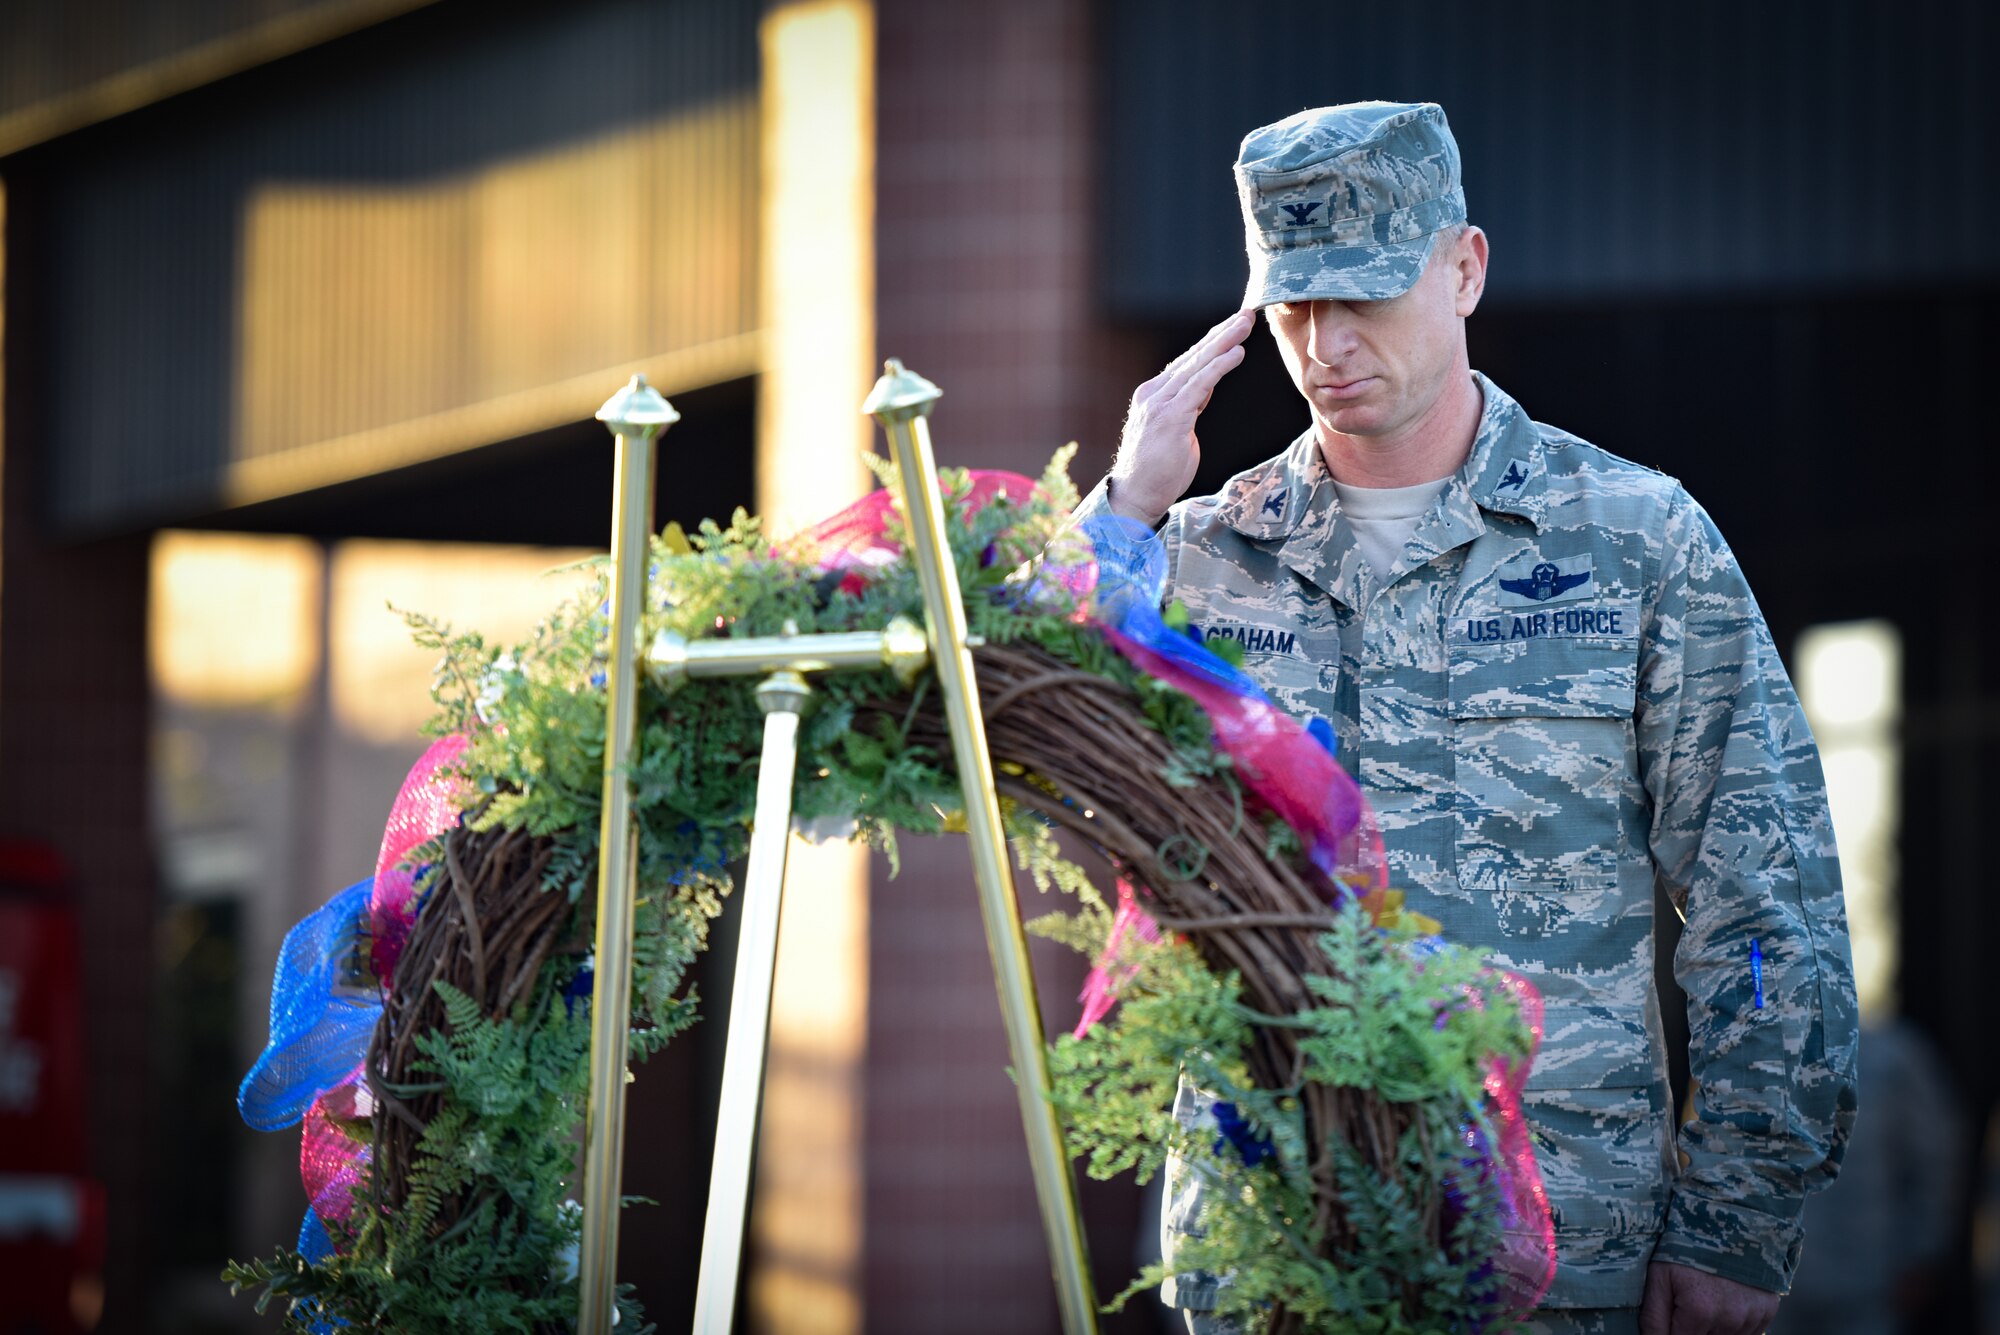 Whiteman Air Force Base Personnel and Base Honor Guard took place in a wreath laying ceremony to commemorate those lost during the September 11th attacks.